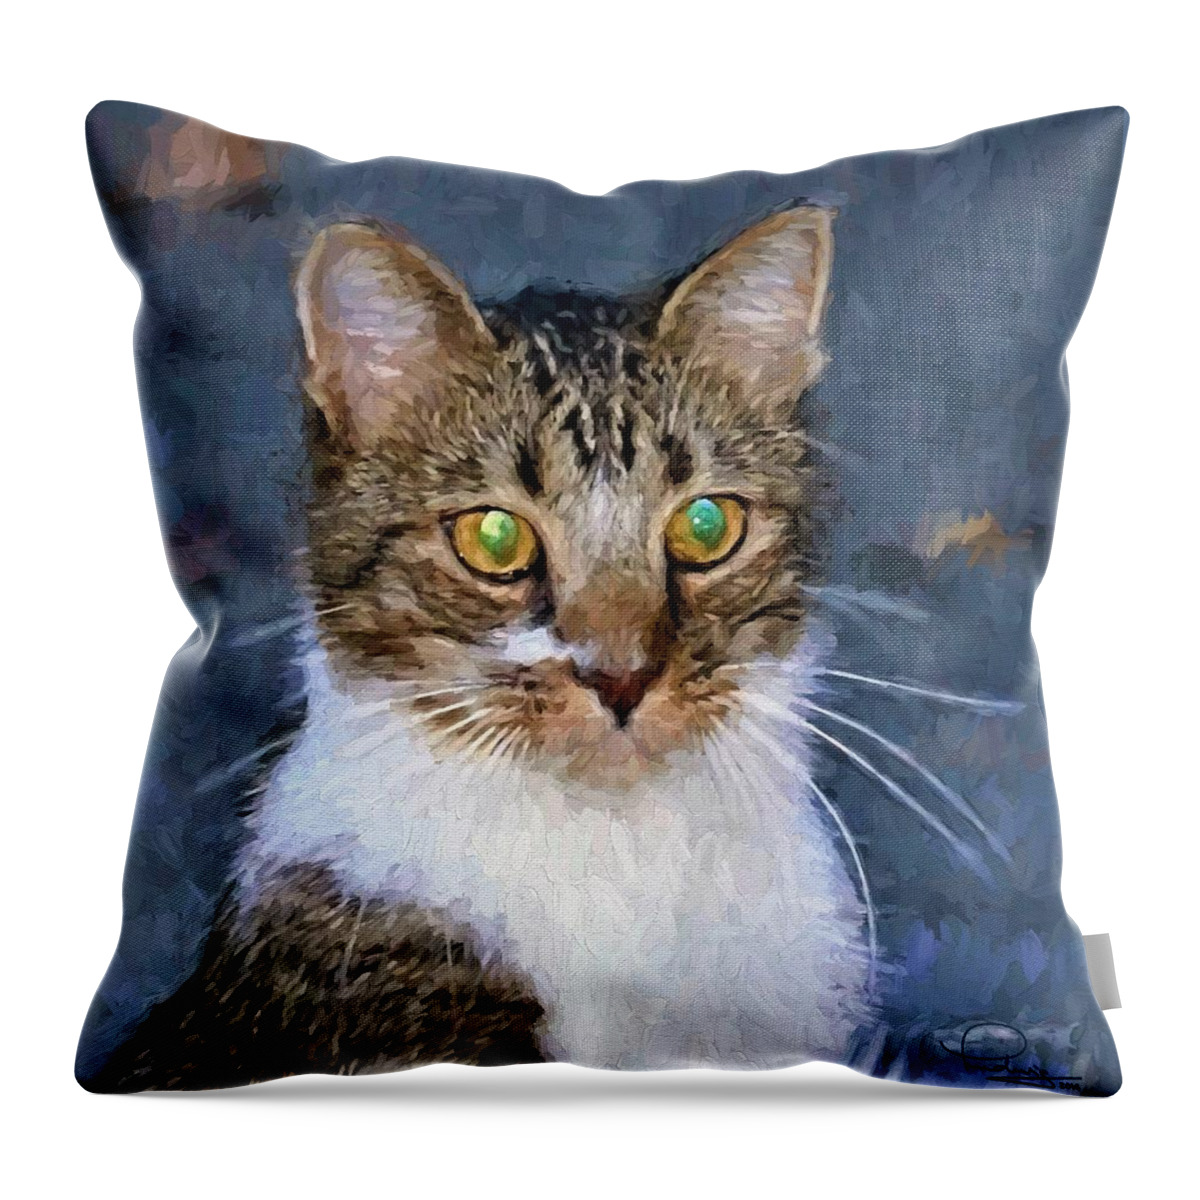 Cat Throw Pillow featuring the digital art With Eyes On by Ludwig Keck